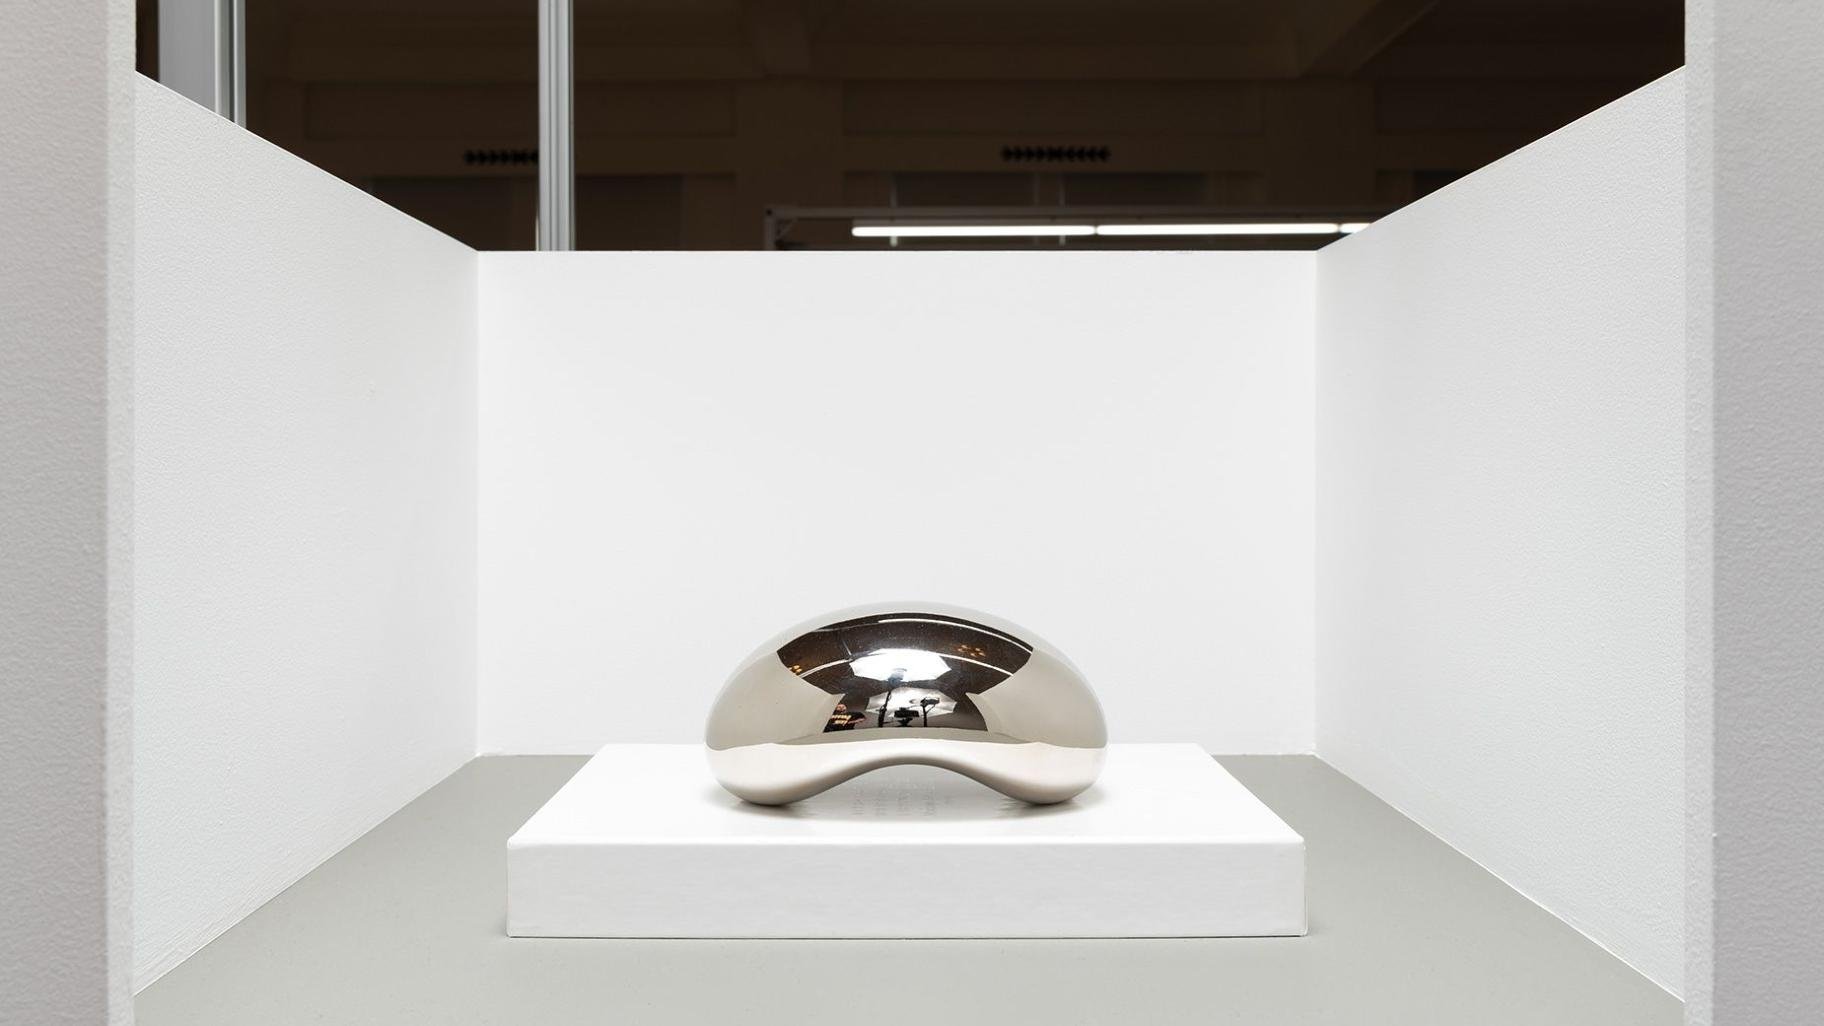 In 2023, the gallery Pickleman presented a tiny version of a Chicago landmark with this “mini bean” by Anish Kapoor. (Roland Miller / Barely Fair via CNN Newsource)